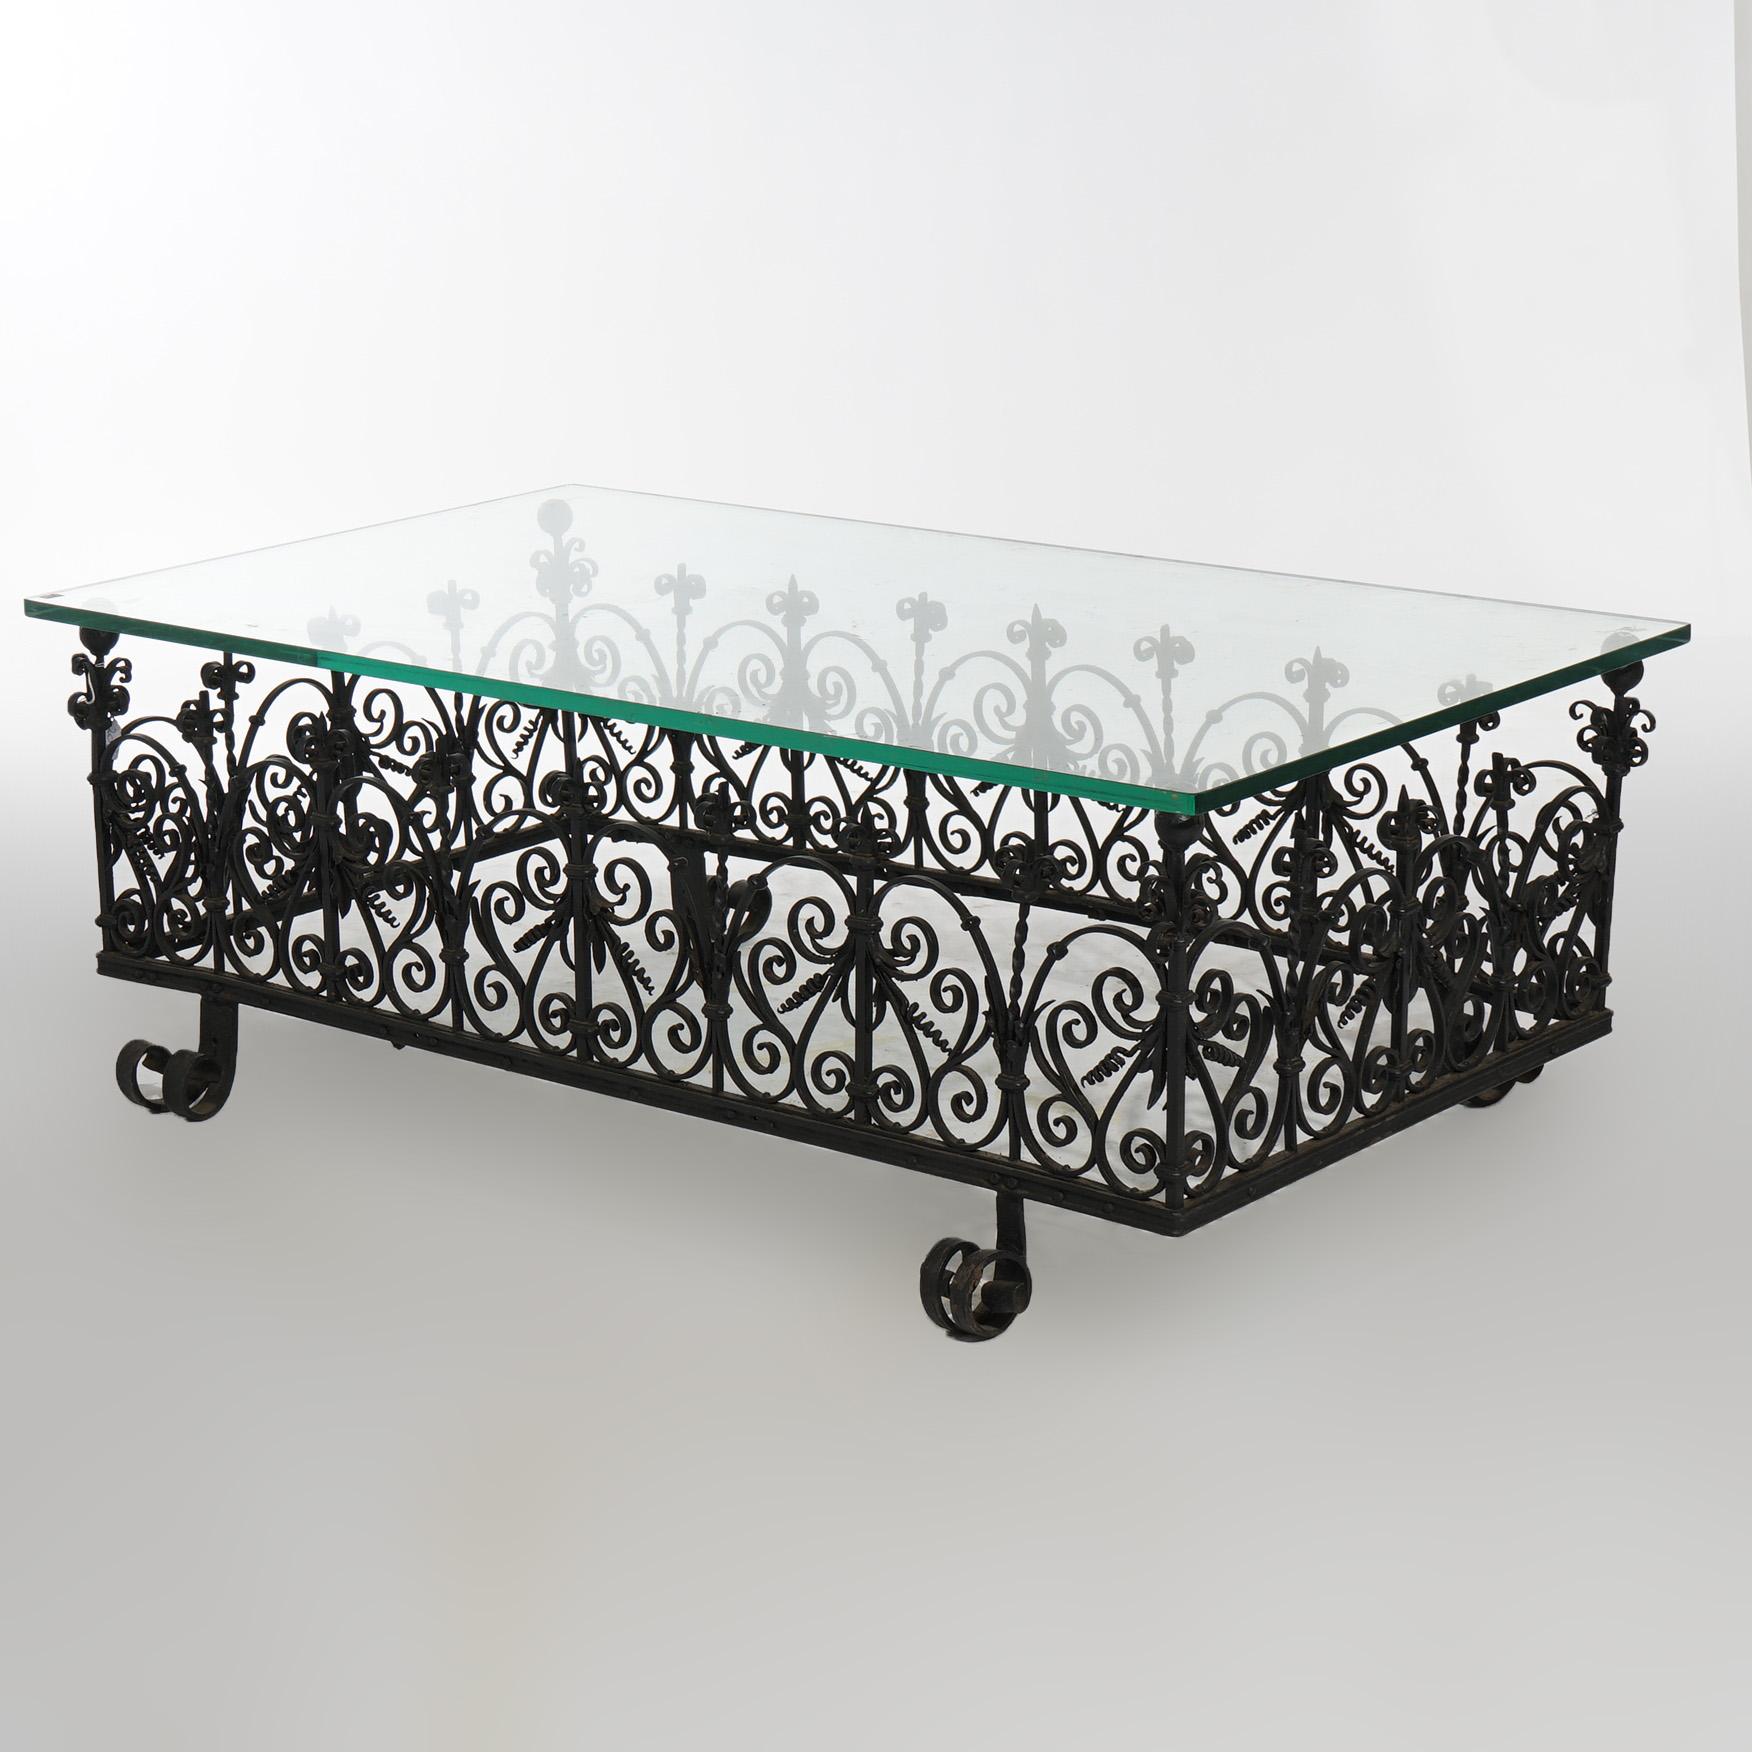 An antique Art and Crafts low table in the manner of Yellin offers glass top over scroll and stylized foliate form wrought iron base, c1920

Measures - 19.75